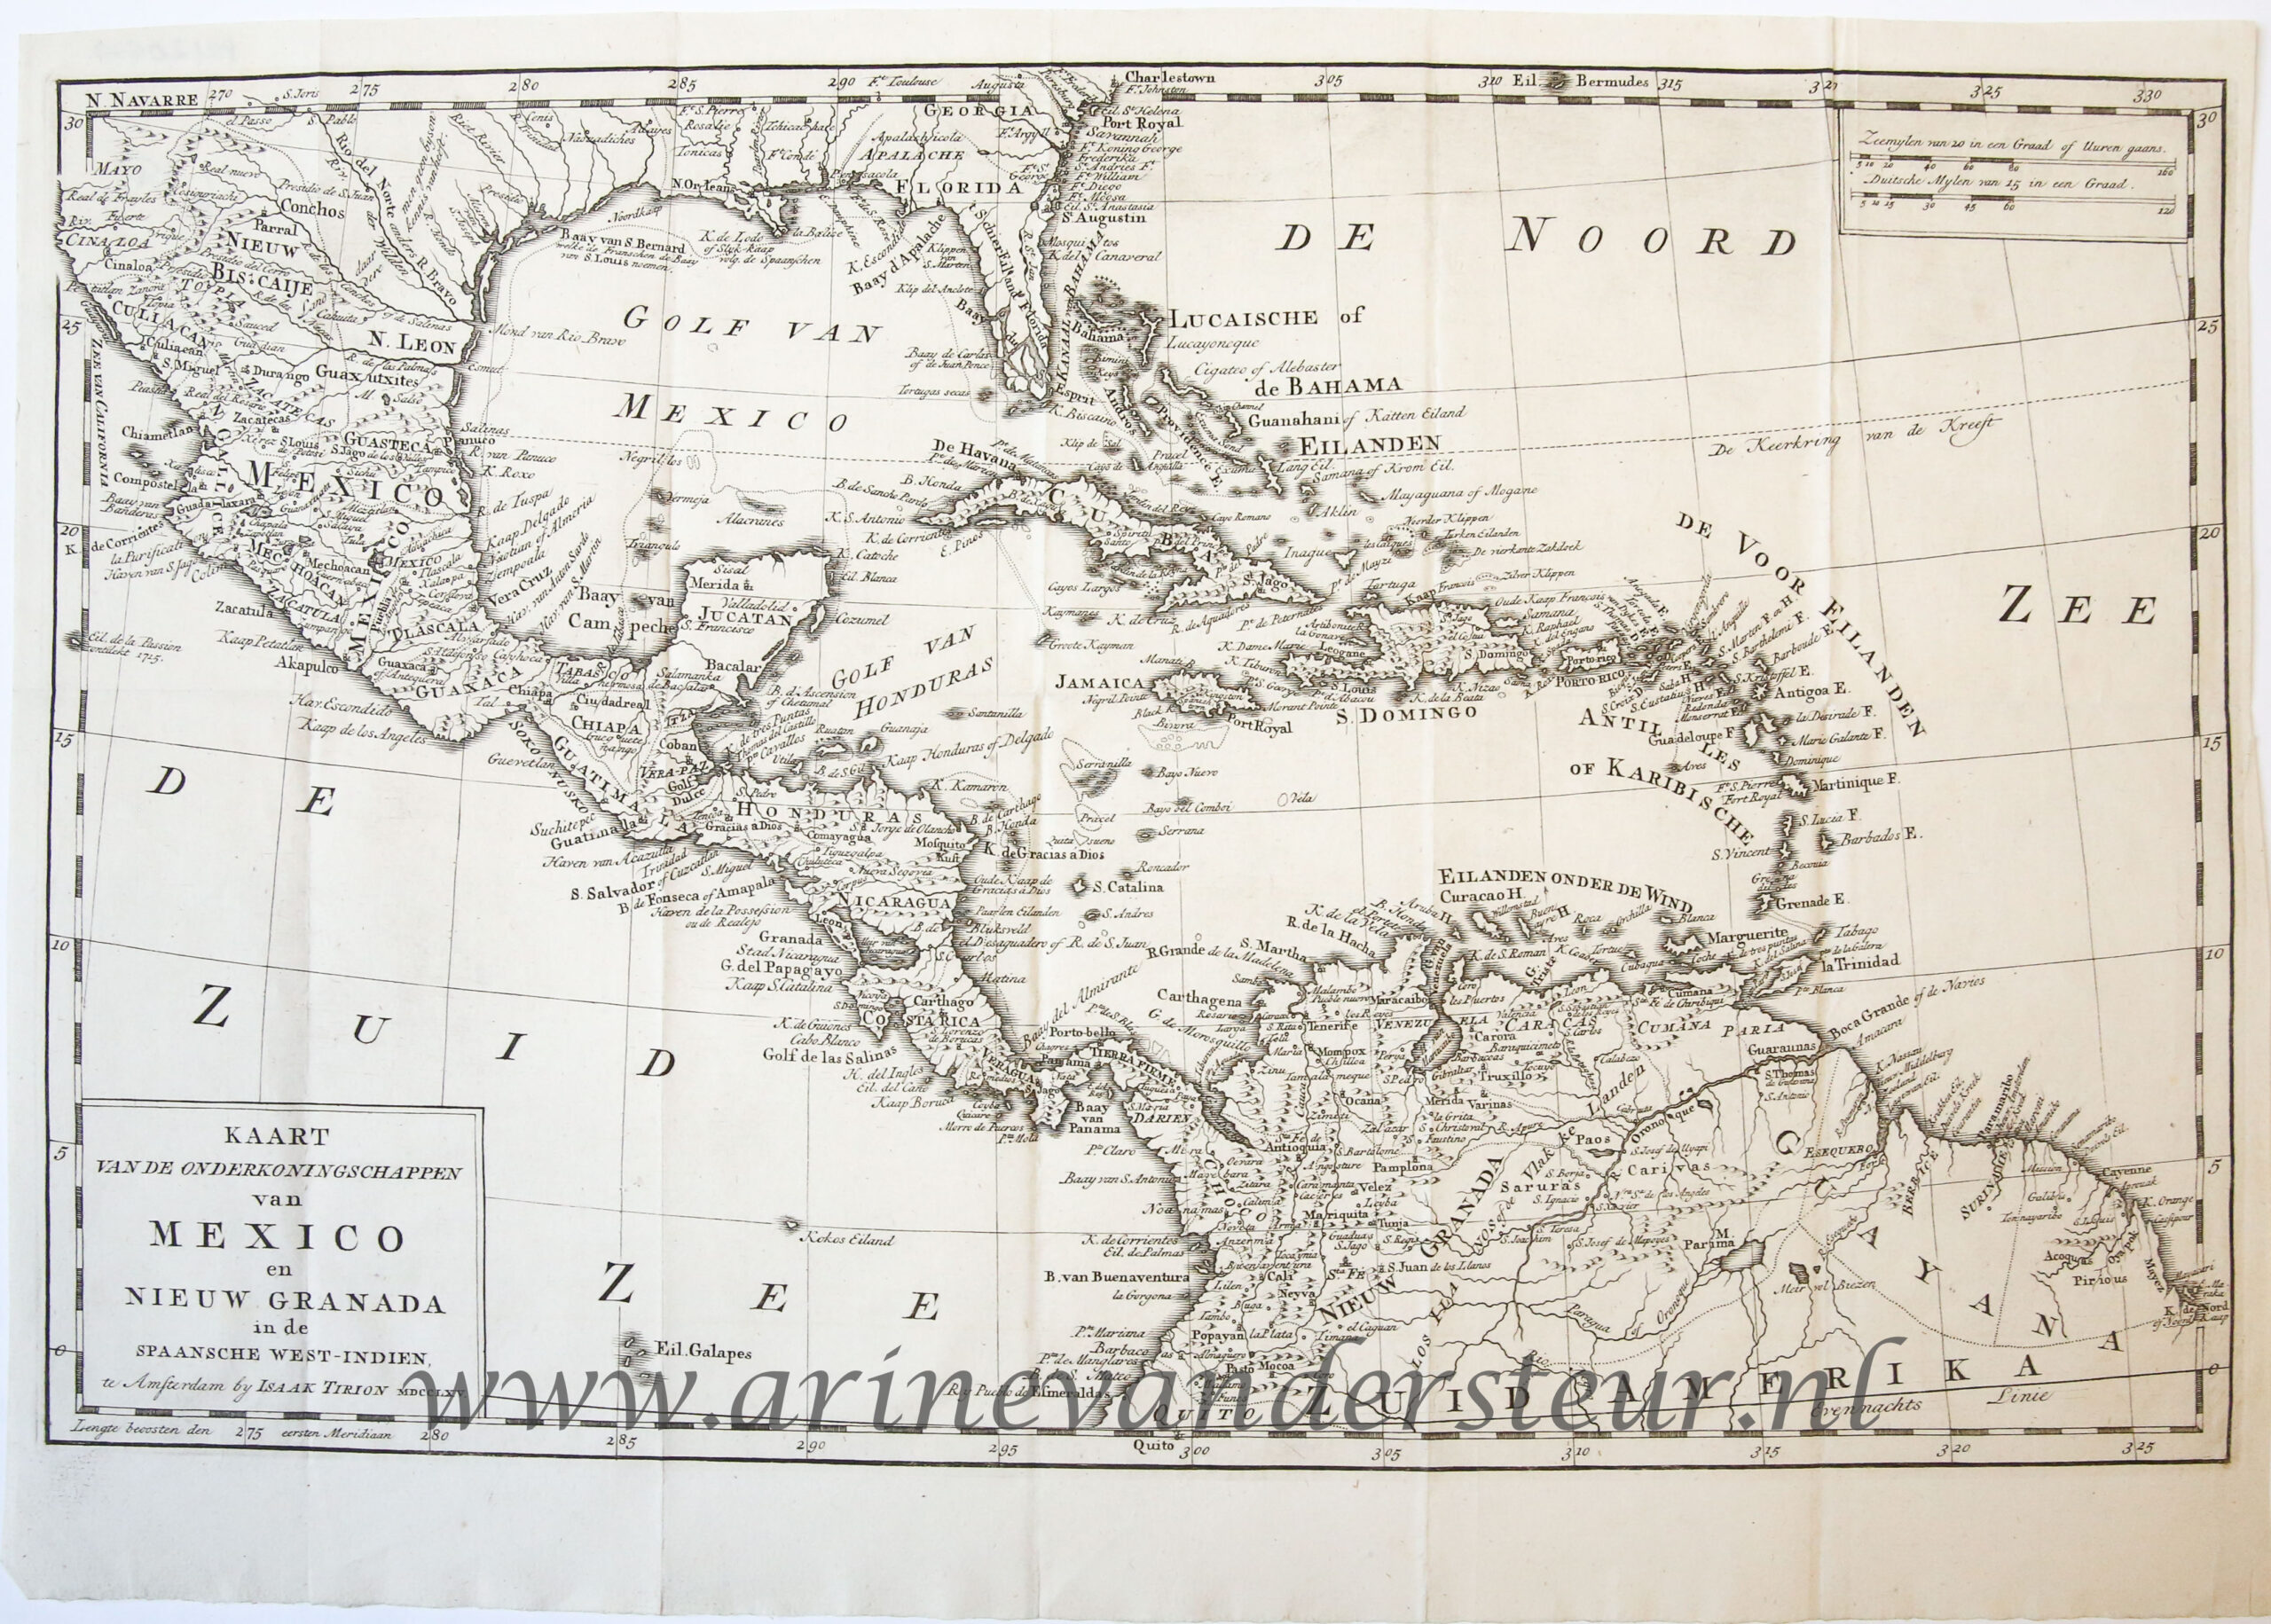 [Antique print, cartography] Map of Mexico and the Spanish West Indies, published 1765.